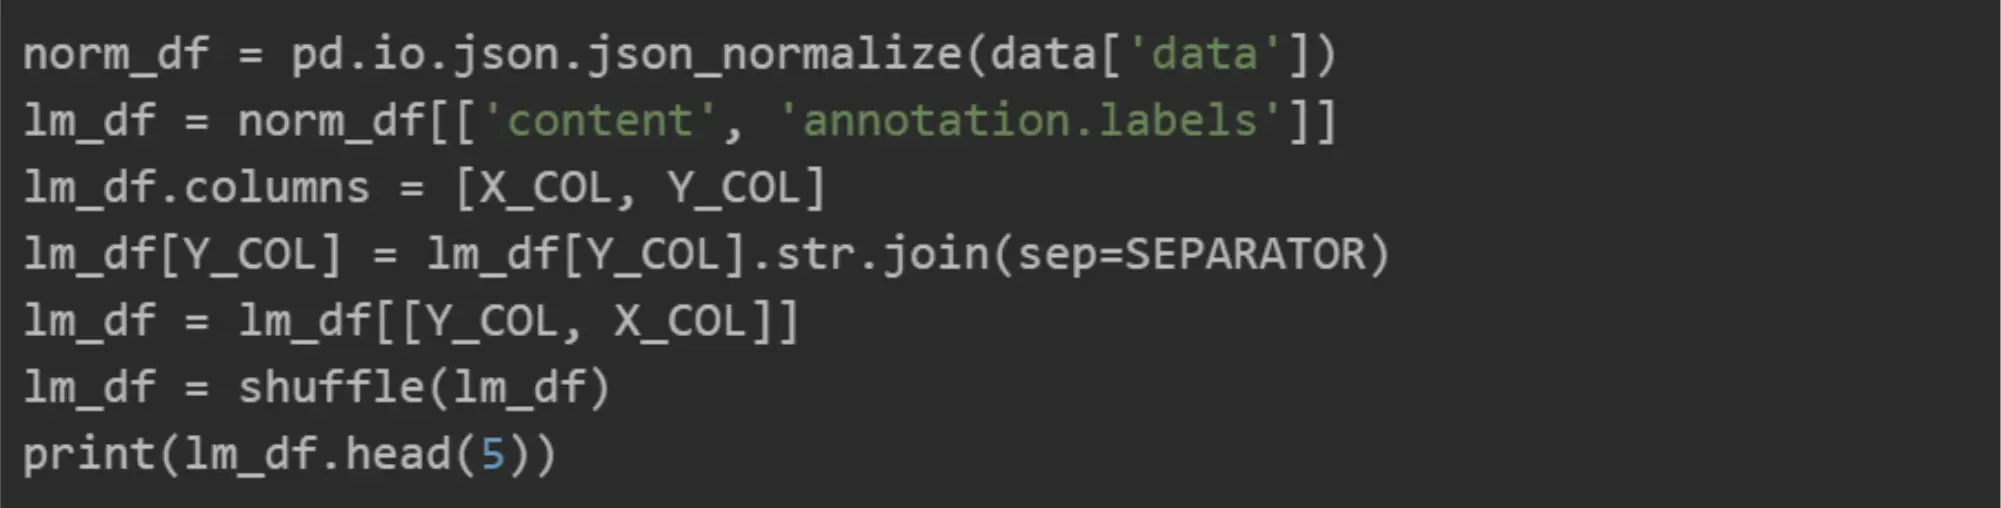 normalizing dataset as in JSON